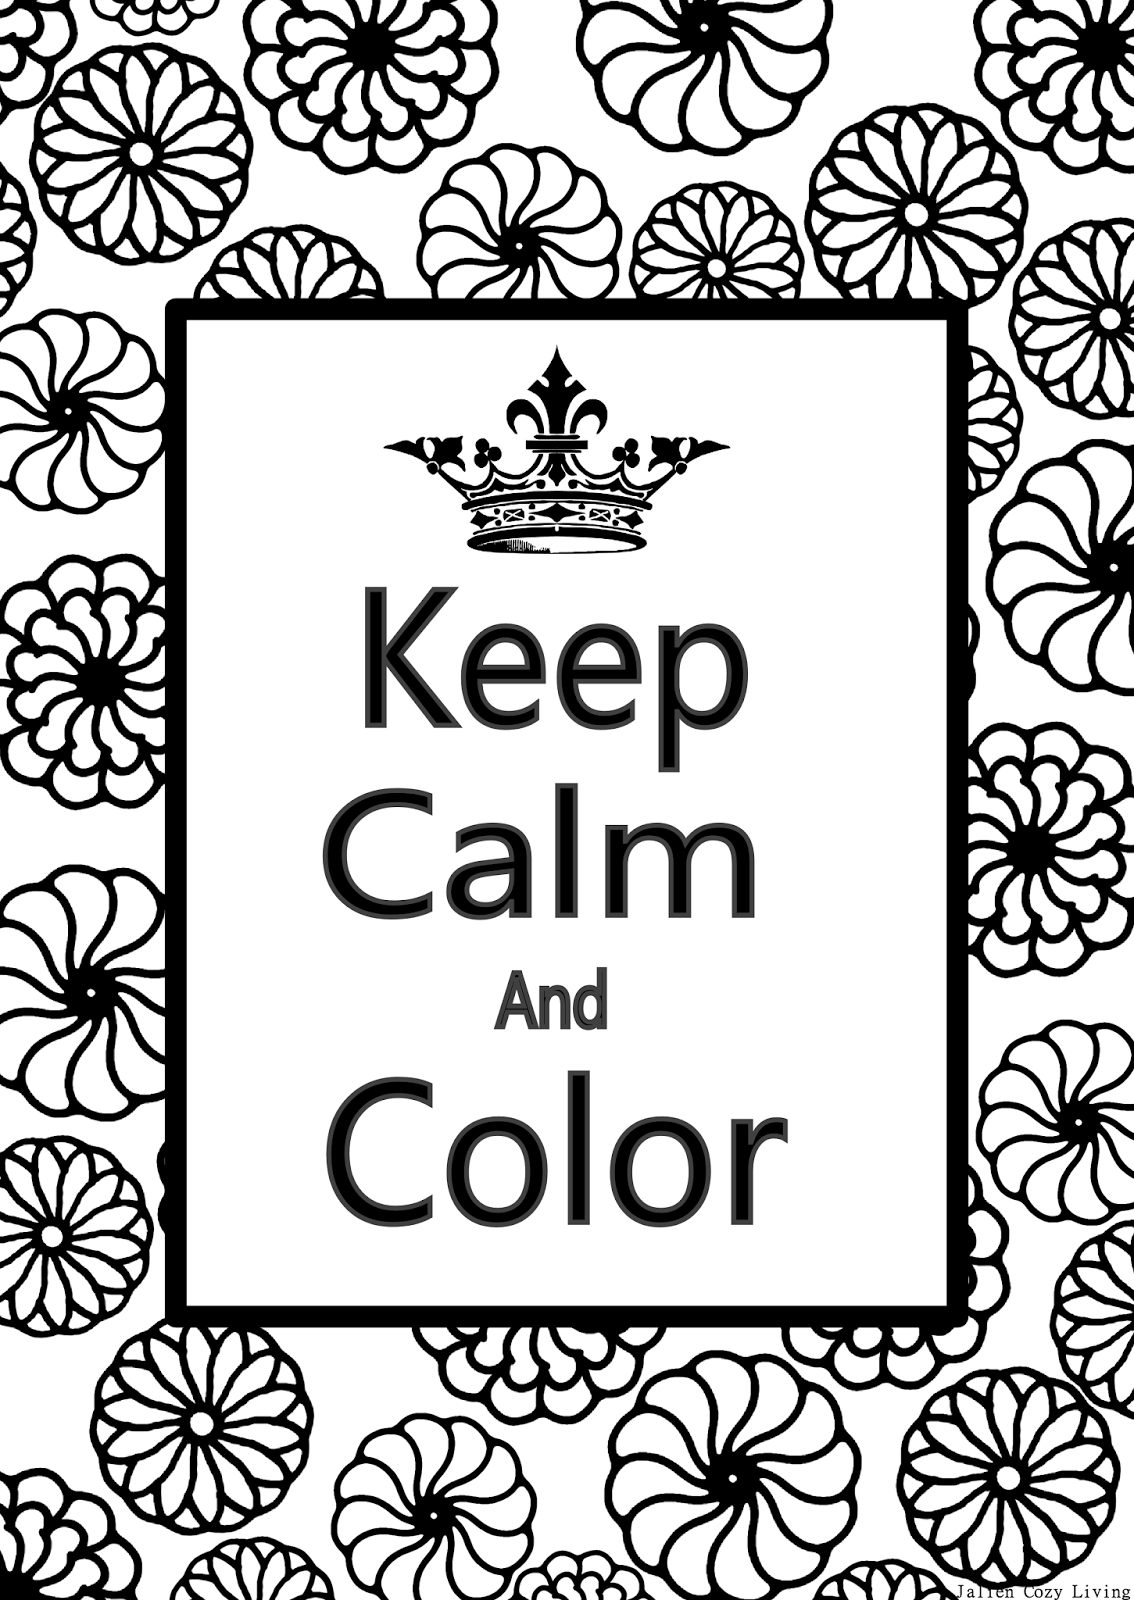 Jalien Cozy Living: Keep Calm And Color!